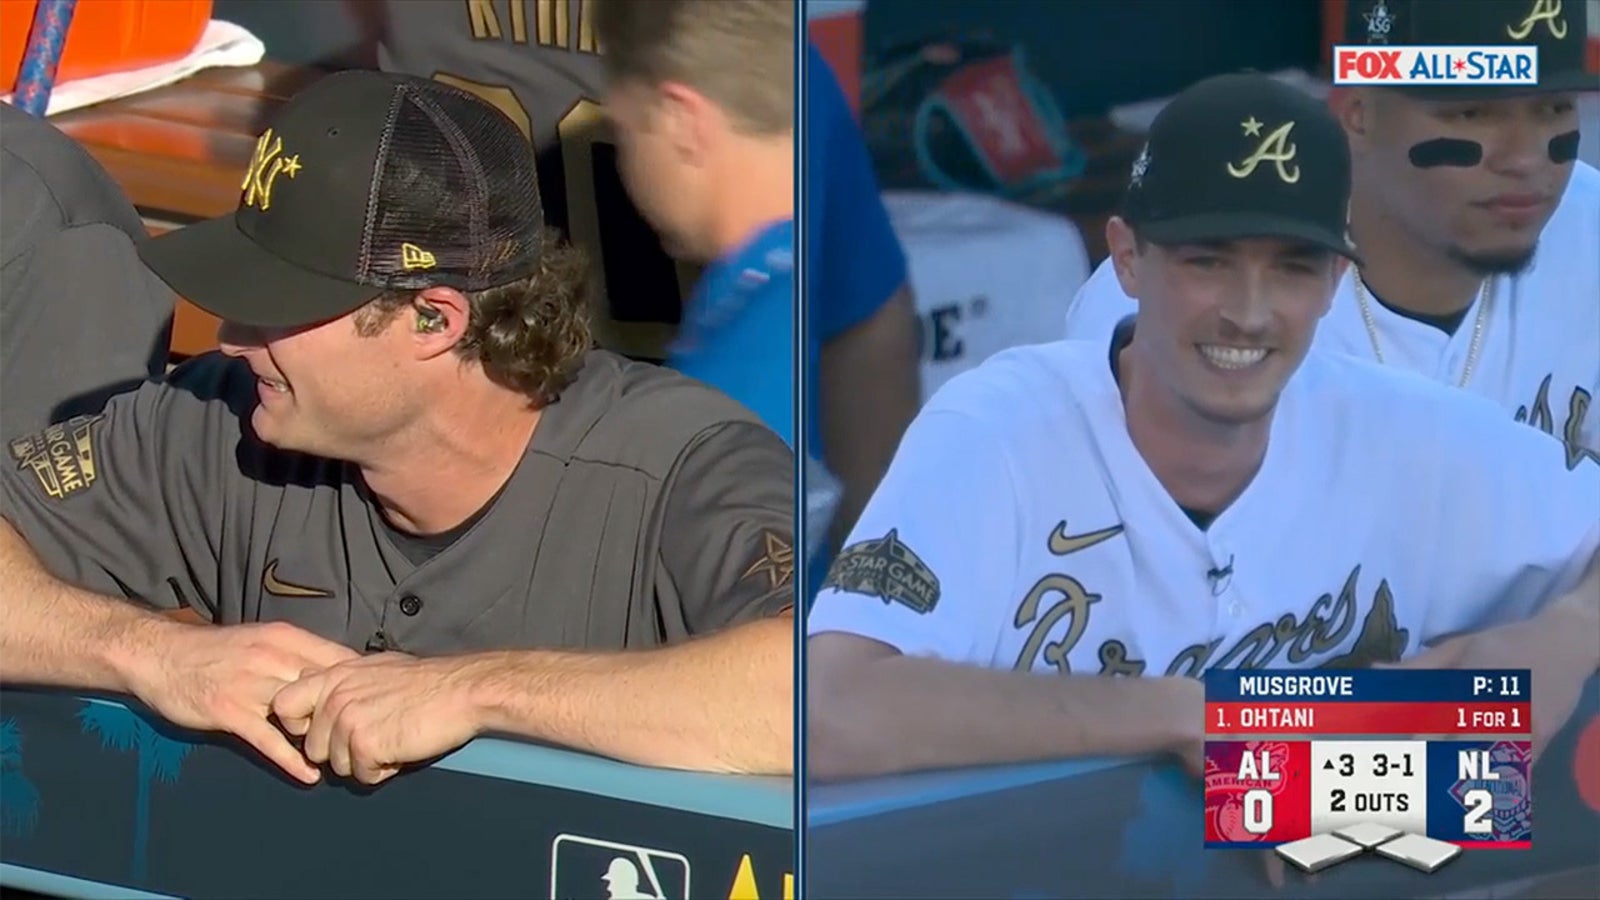 Mic'd up: Max Fried and Gerrit Cole talk Shohei Ohtani, All-Star memories, and more